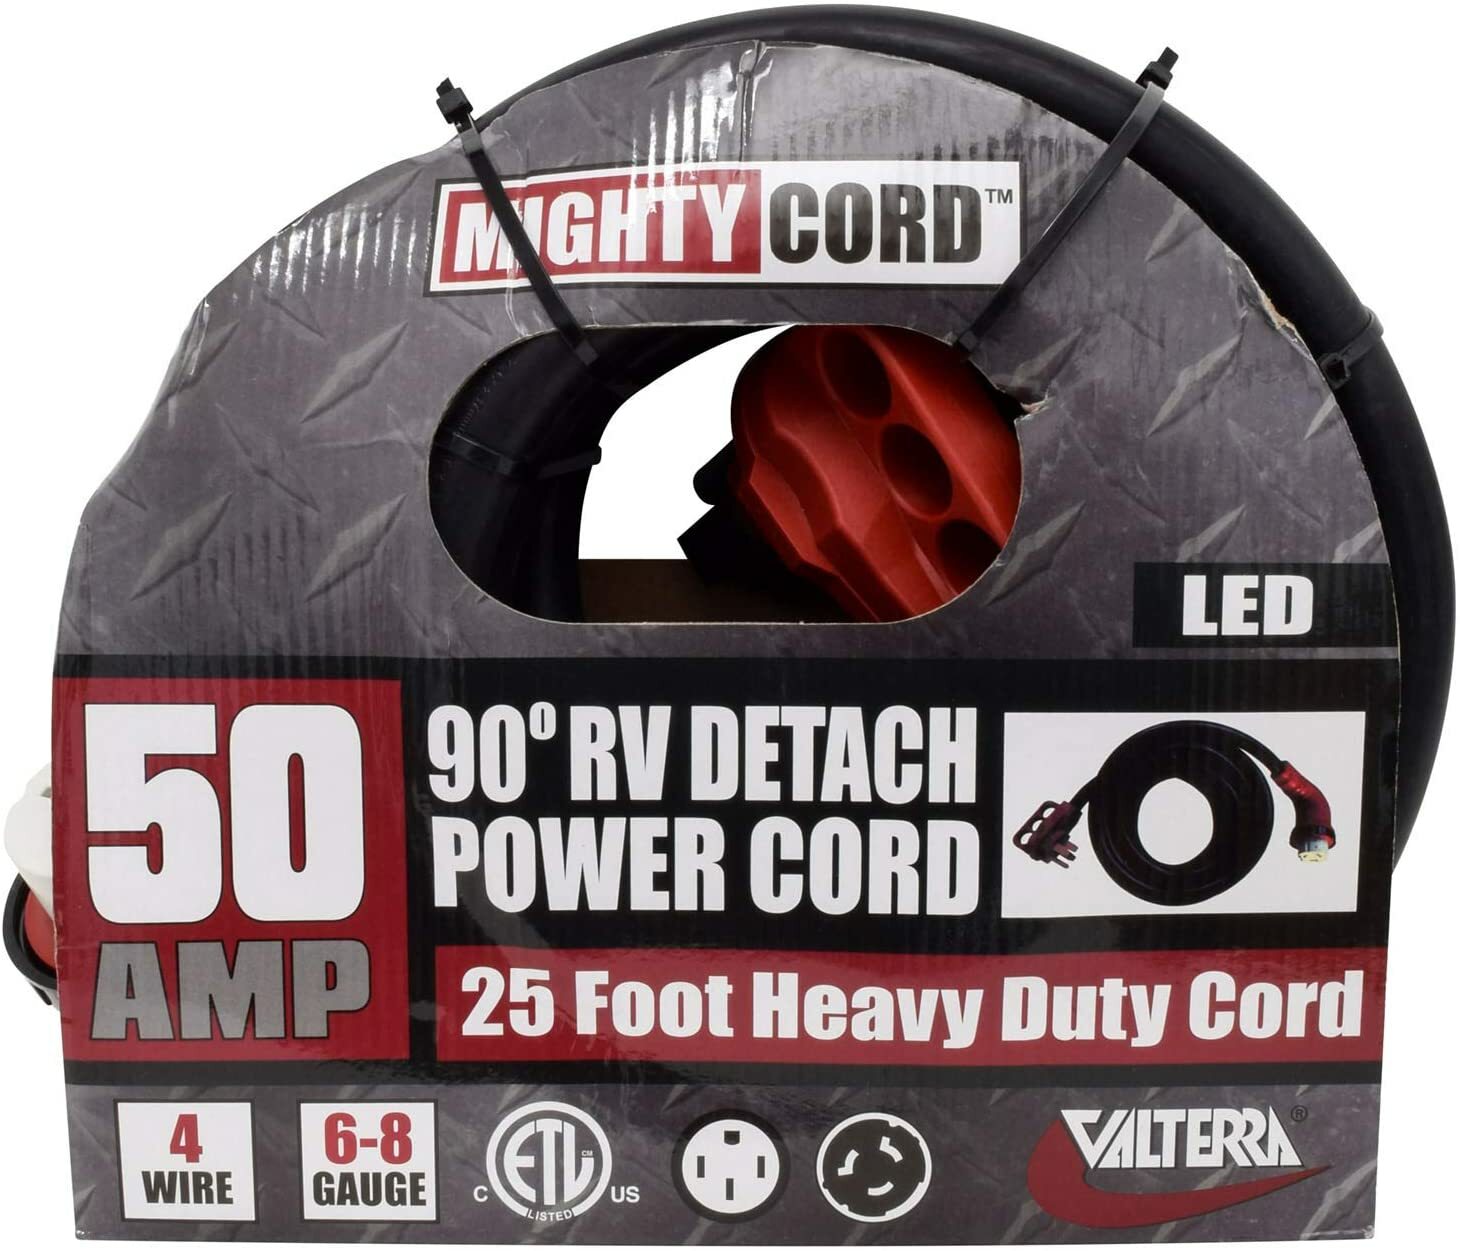 Valterra Mighty Cord® RV 50-Amp 90-Degree Detachable Power Cord, 25-Foot Cord for RV, Red